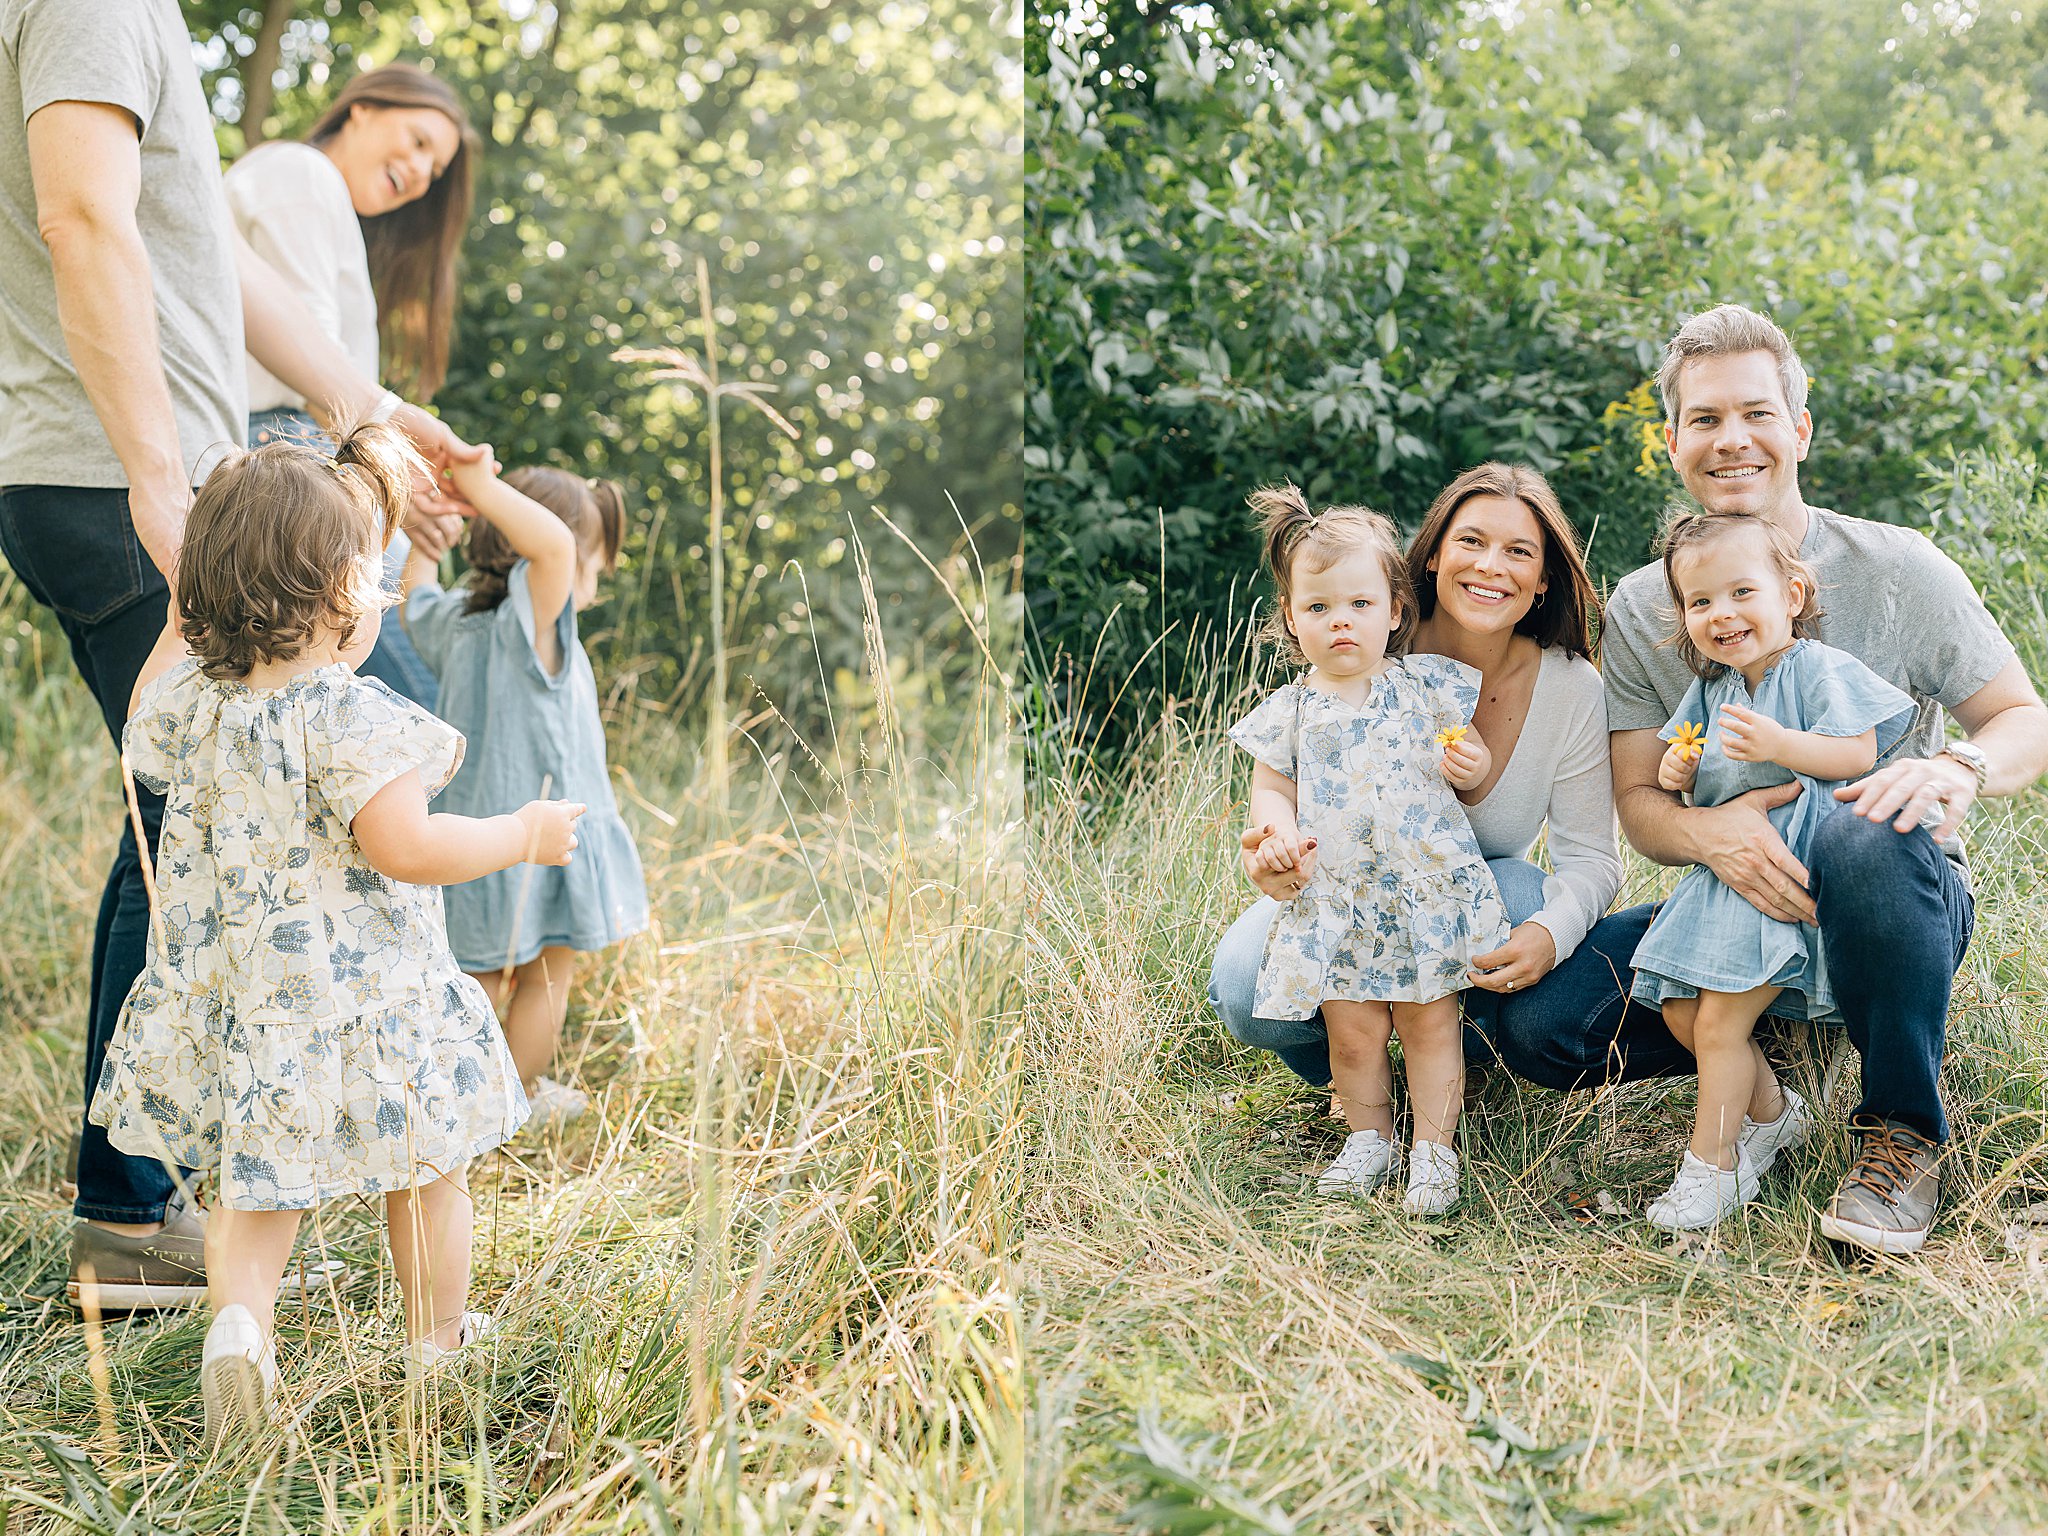 Family pictures with twins with smiling family